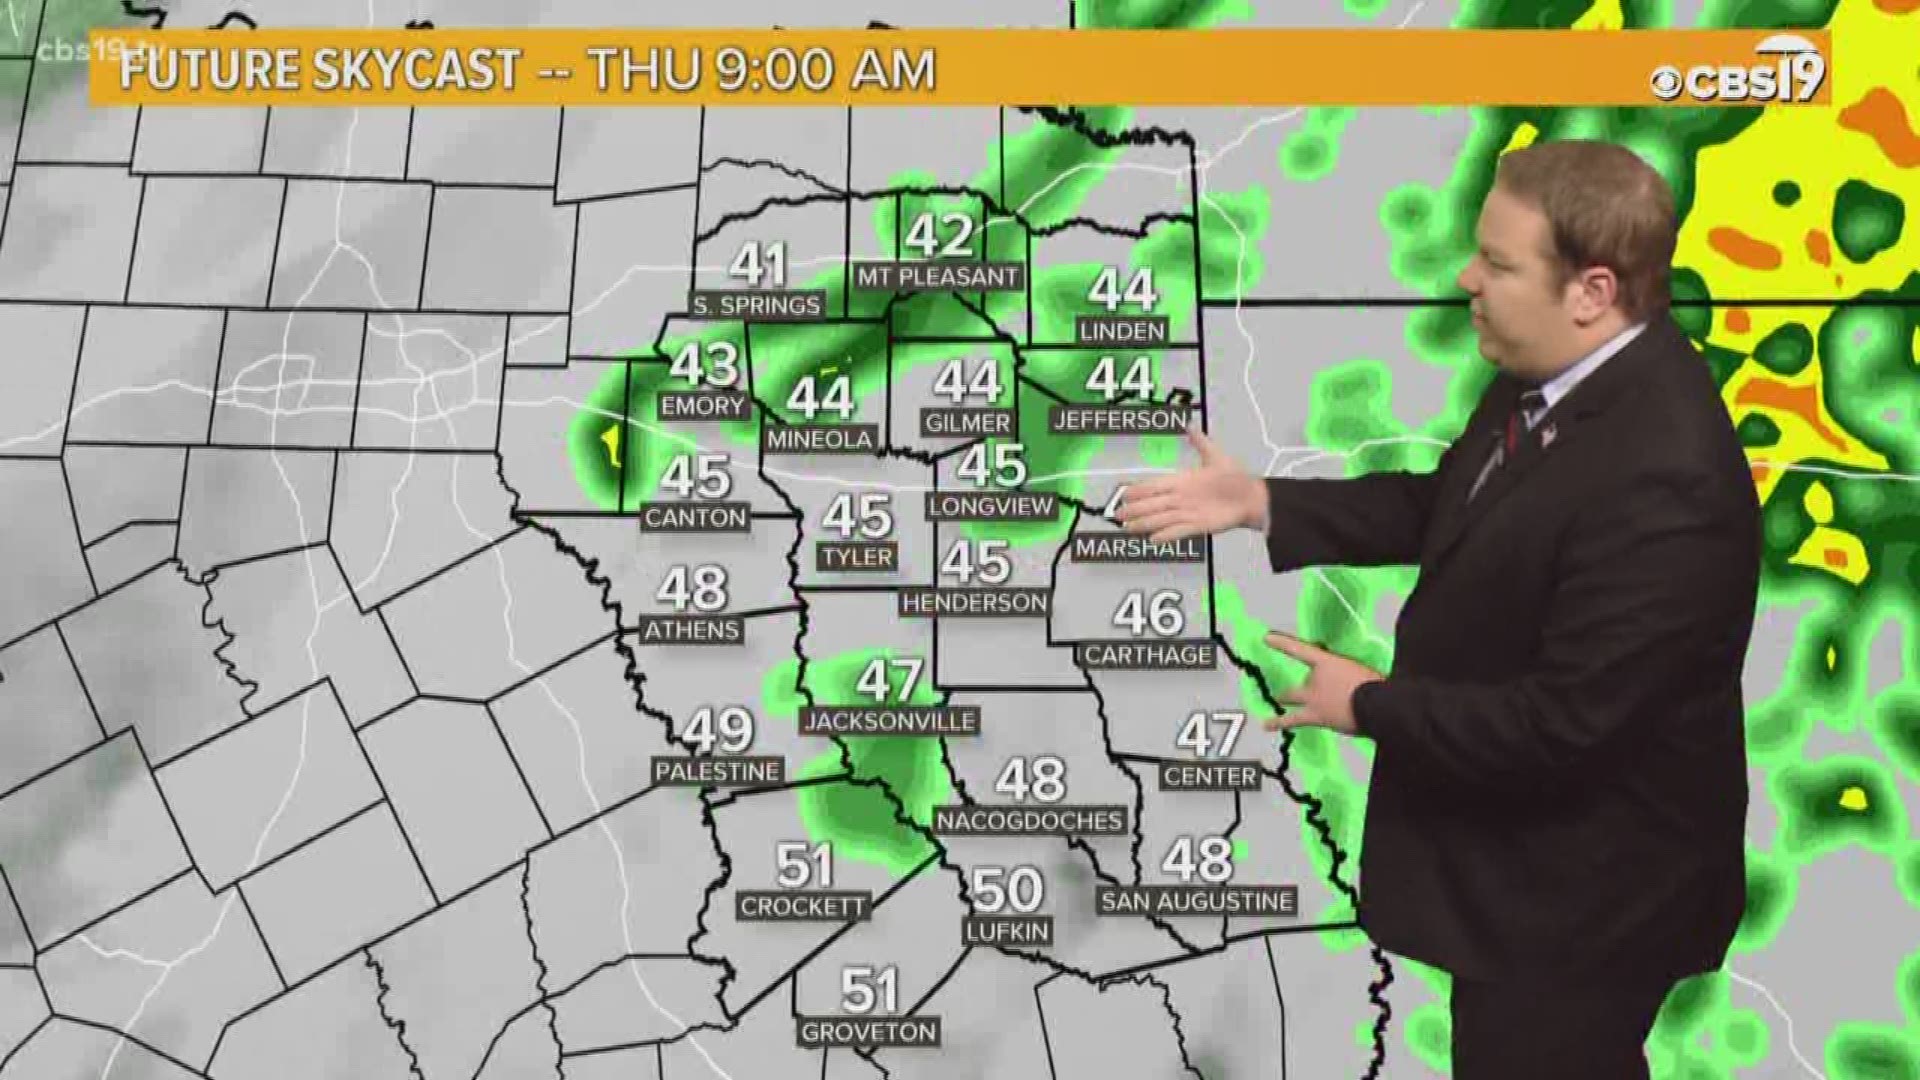 Rain showers continue this morning in East Texas, but should be leaving later today! Meteorologist Michael Behrens has the details!